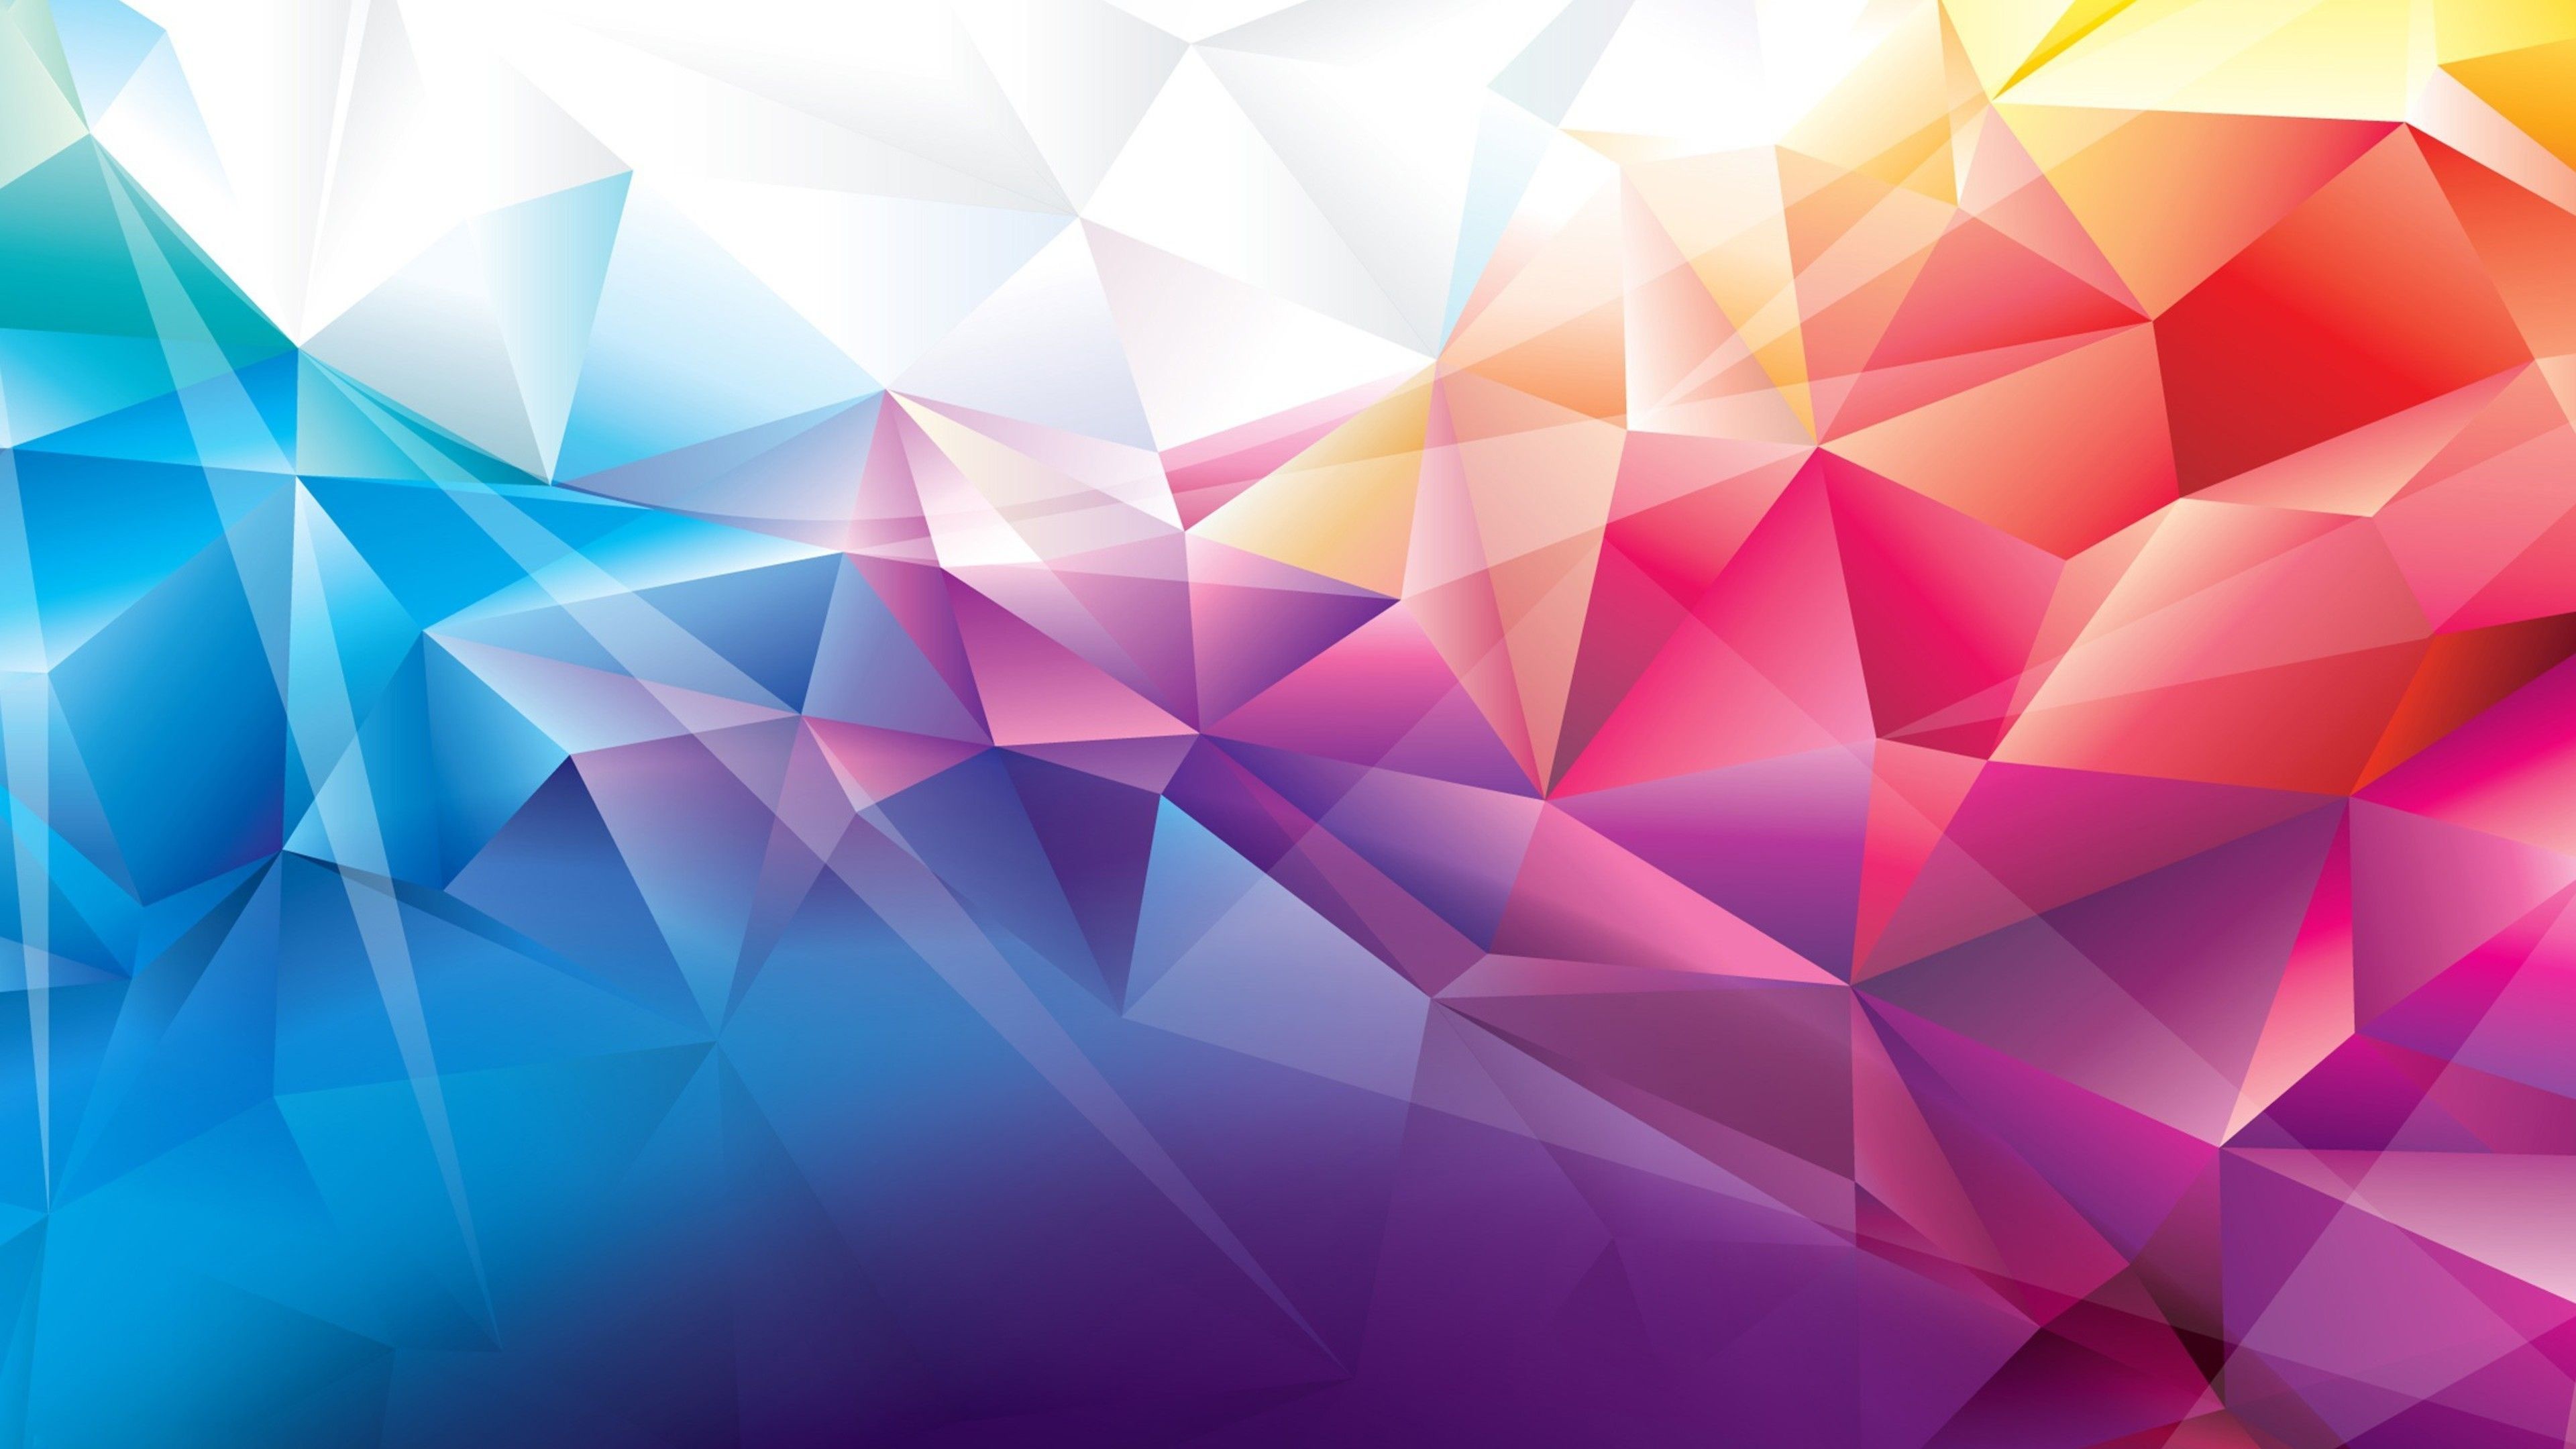 Wallpaper 4k Colorful Polygons abstract wallpaper, colorful wallpaper, polygon wallpaper